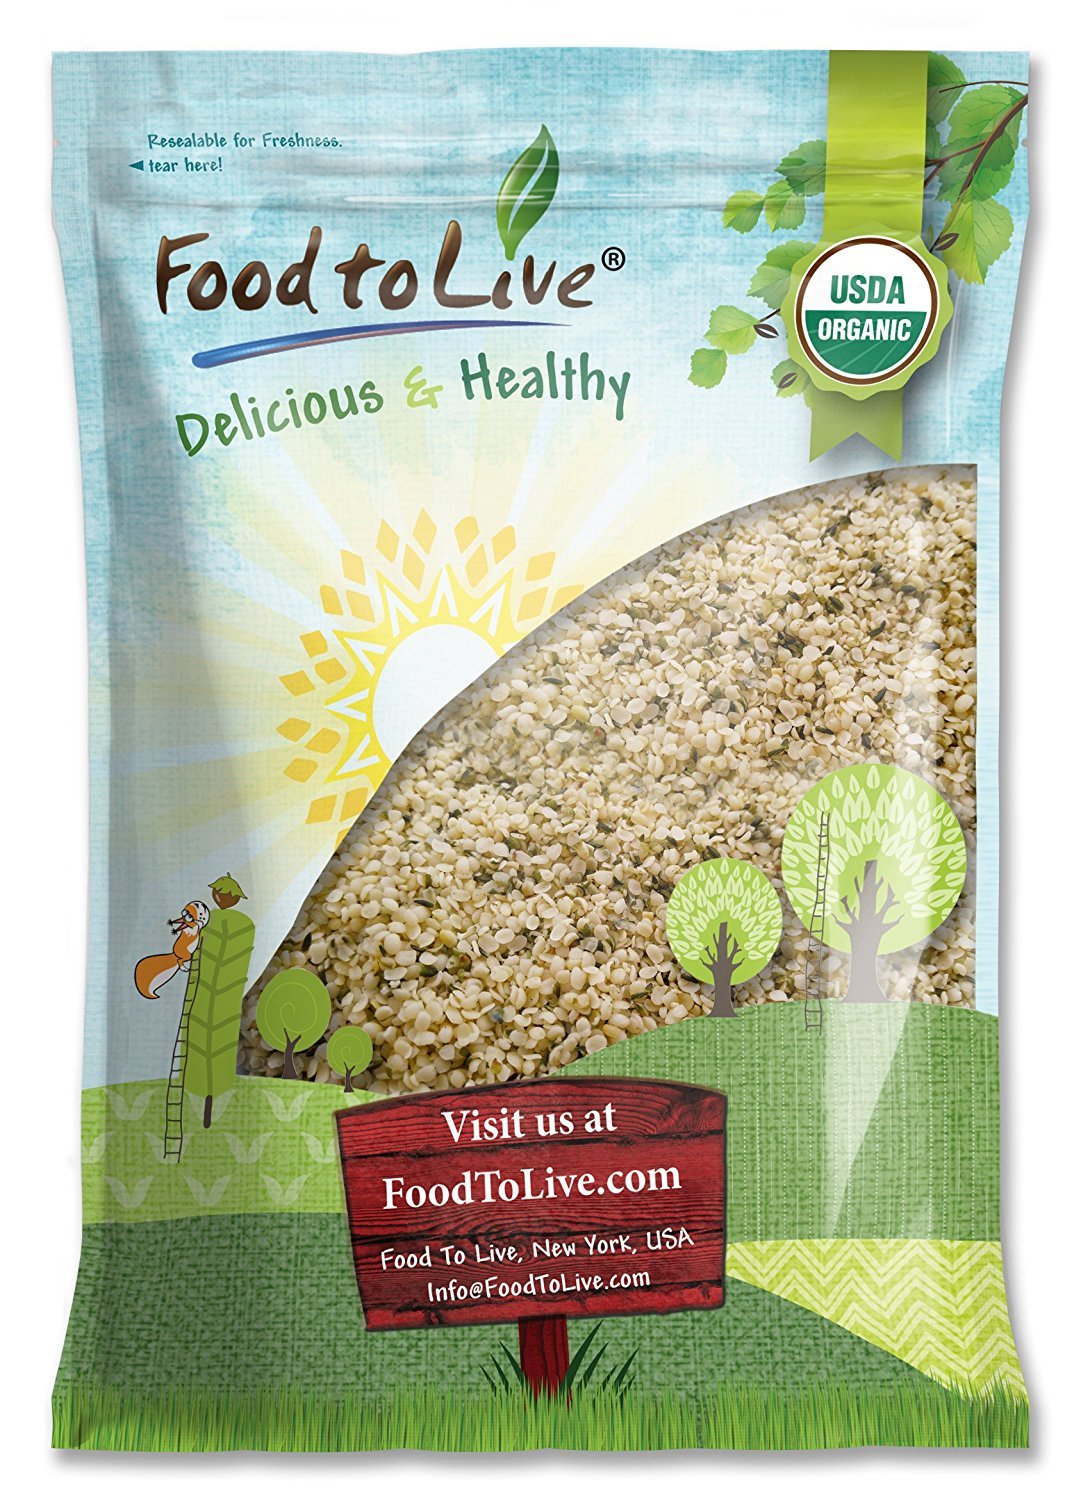 Organic Hemp Seeds - Non-GMO Raw Hearts, Hulled, Shelled, Kosher, Vegan, Bulk, Rich in Omega 3 & 6, Low Carb, Low Sodium, Good Source of Protein & Iron, Great for Oatmeal, Product of China